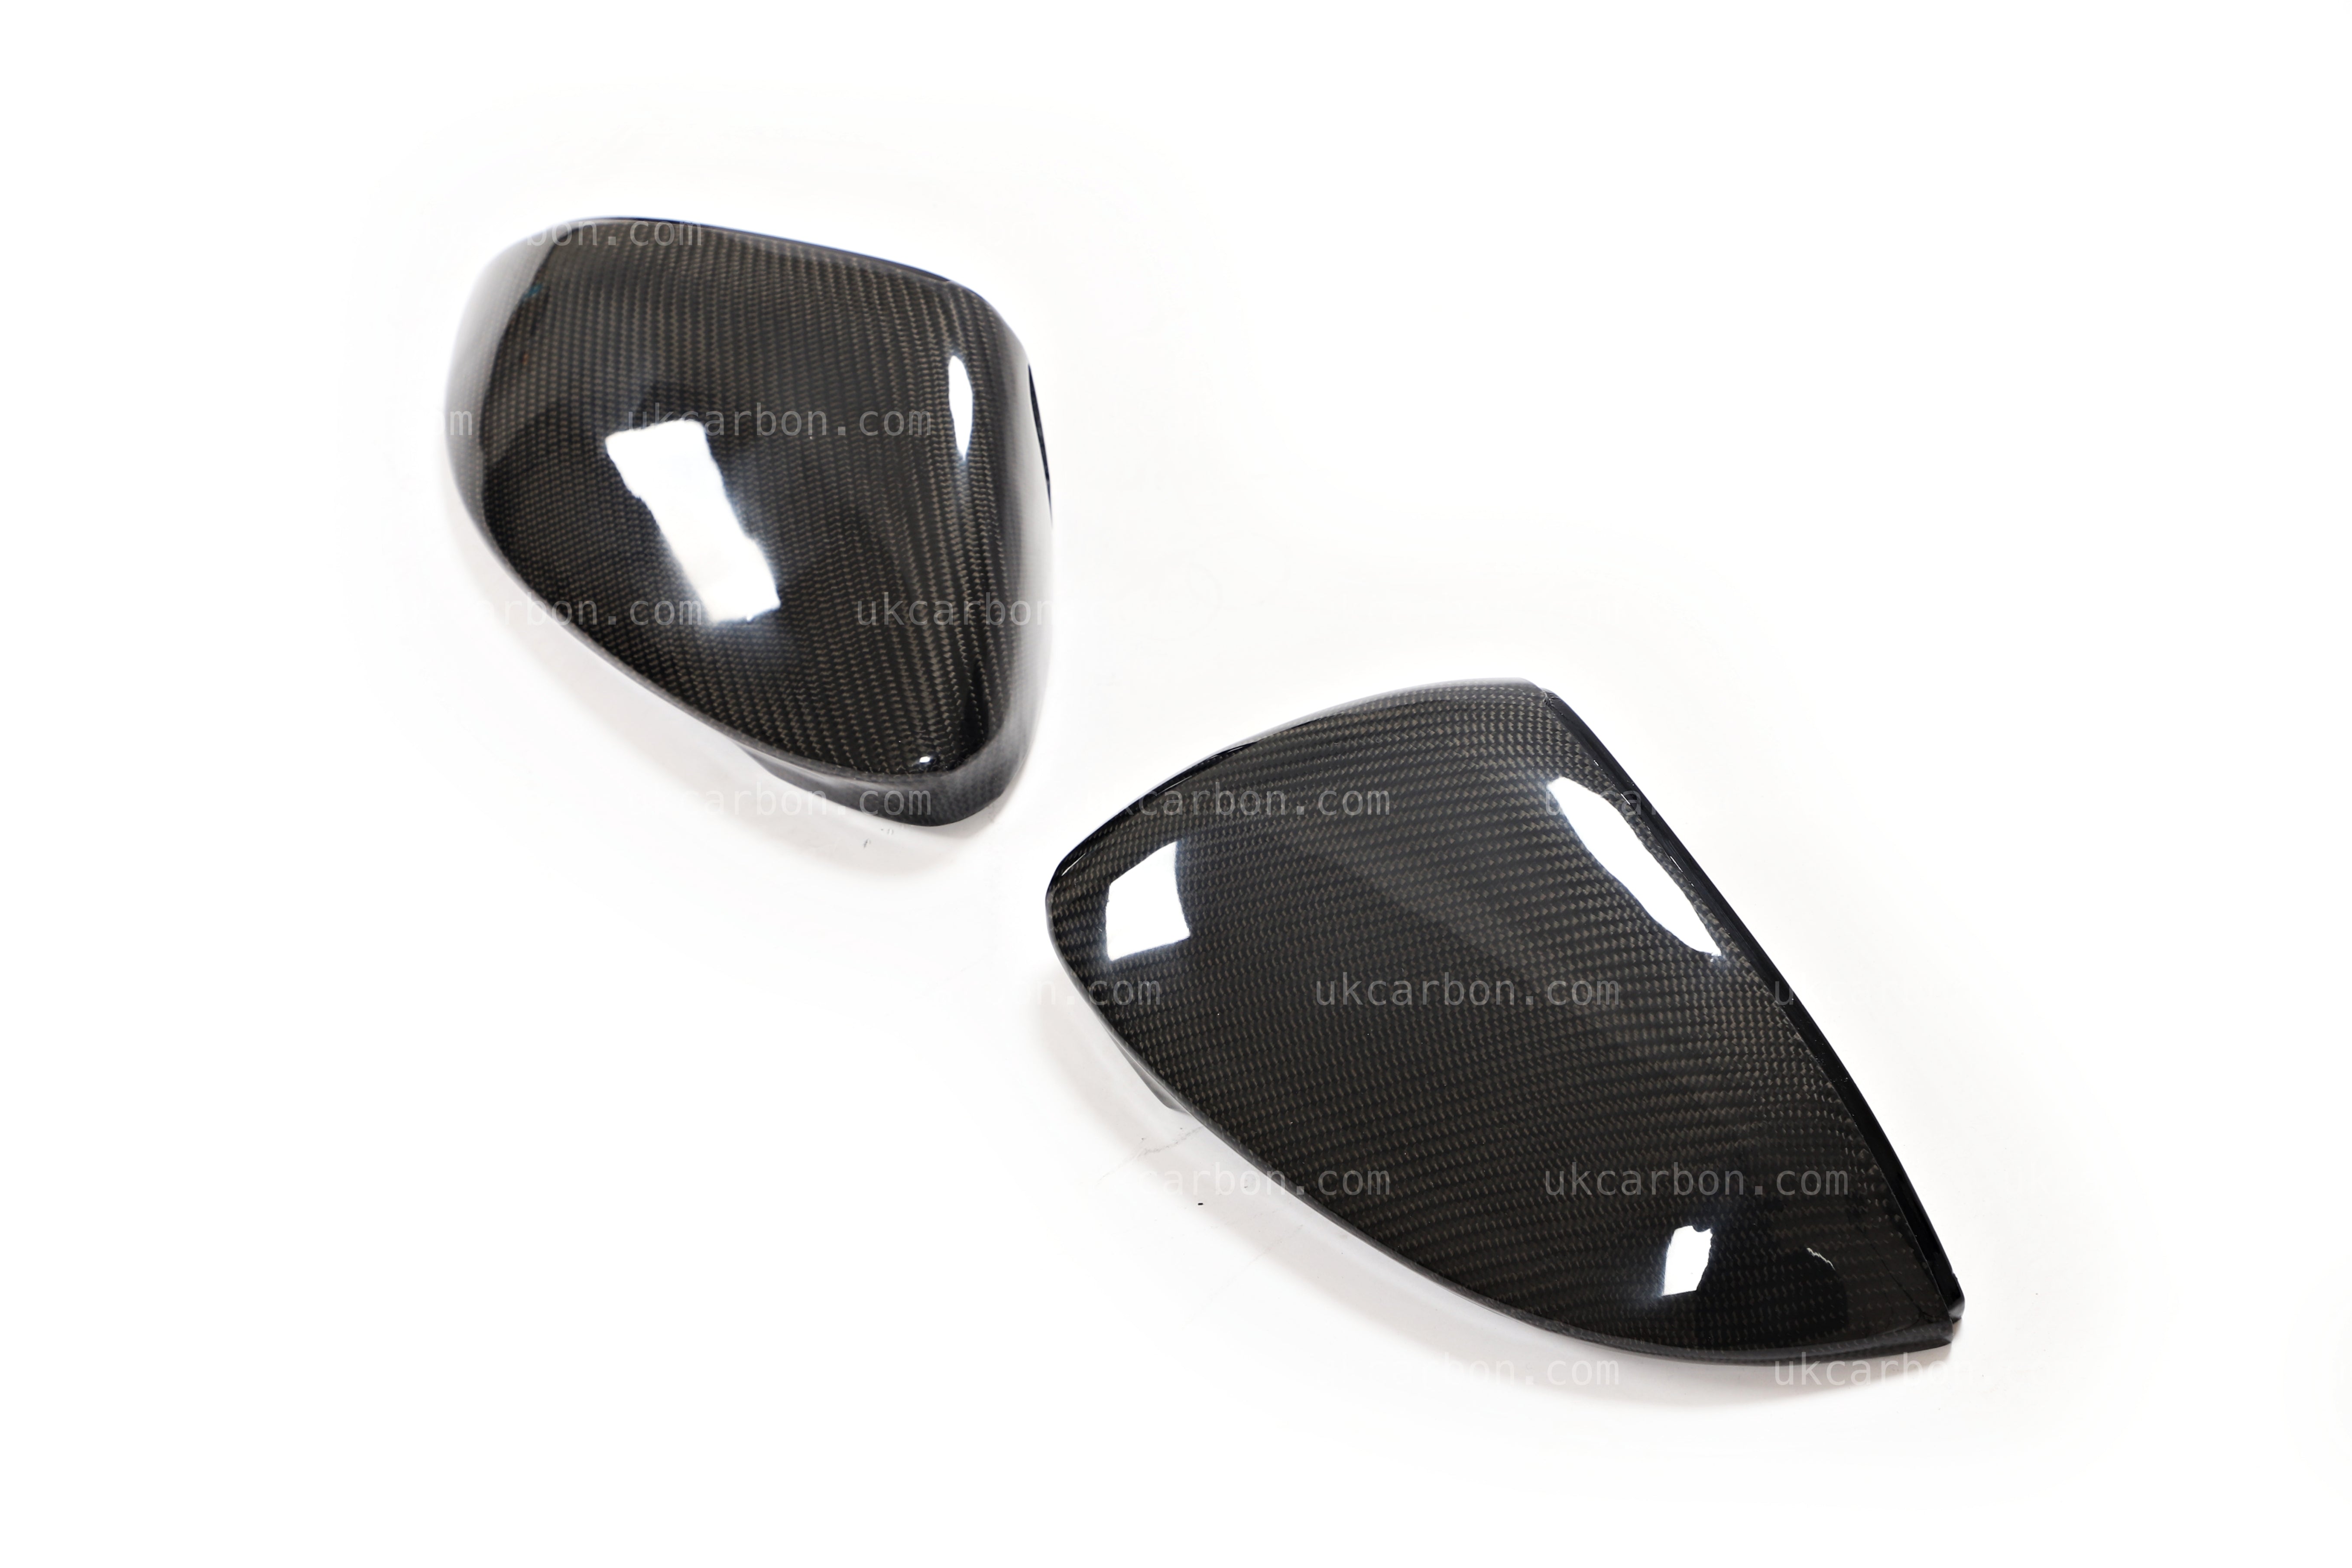 Volkswagen Golf GTI R Carbon Fibre Wing Mirror Cover Lane Assist MK8 by UKCarbon